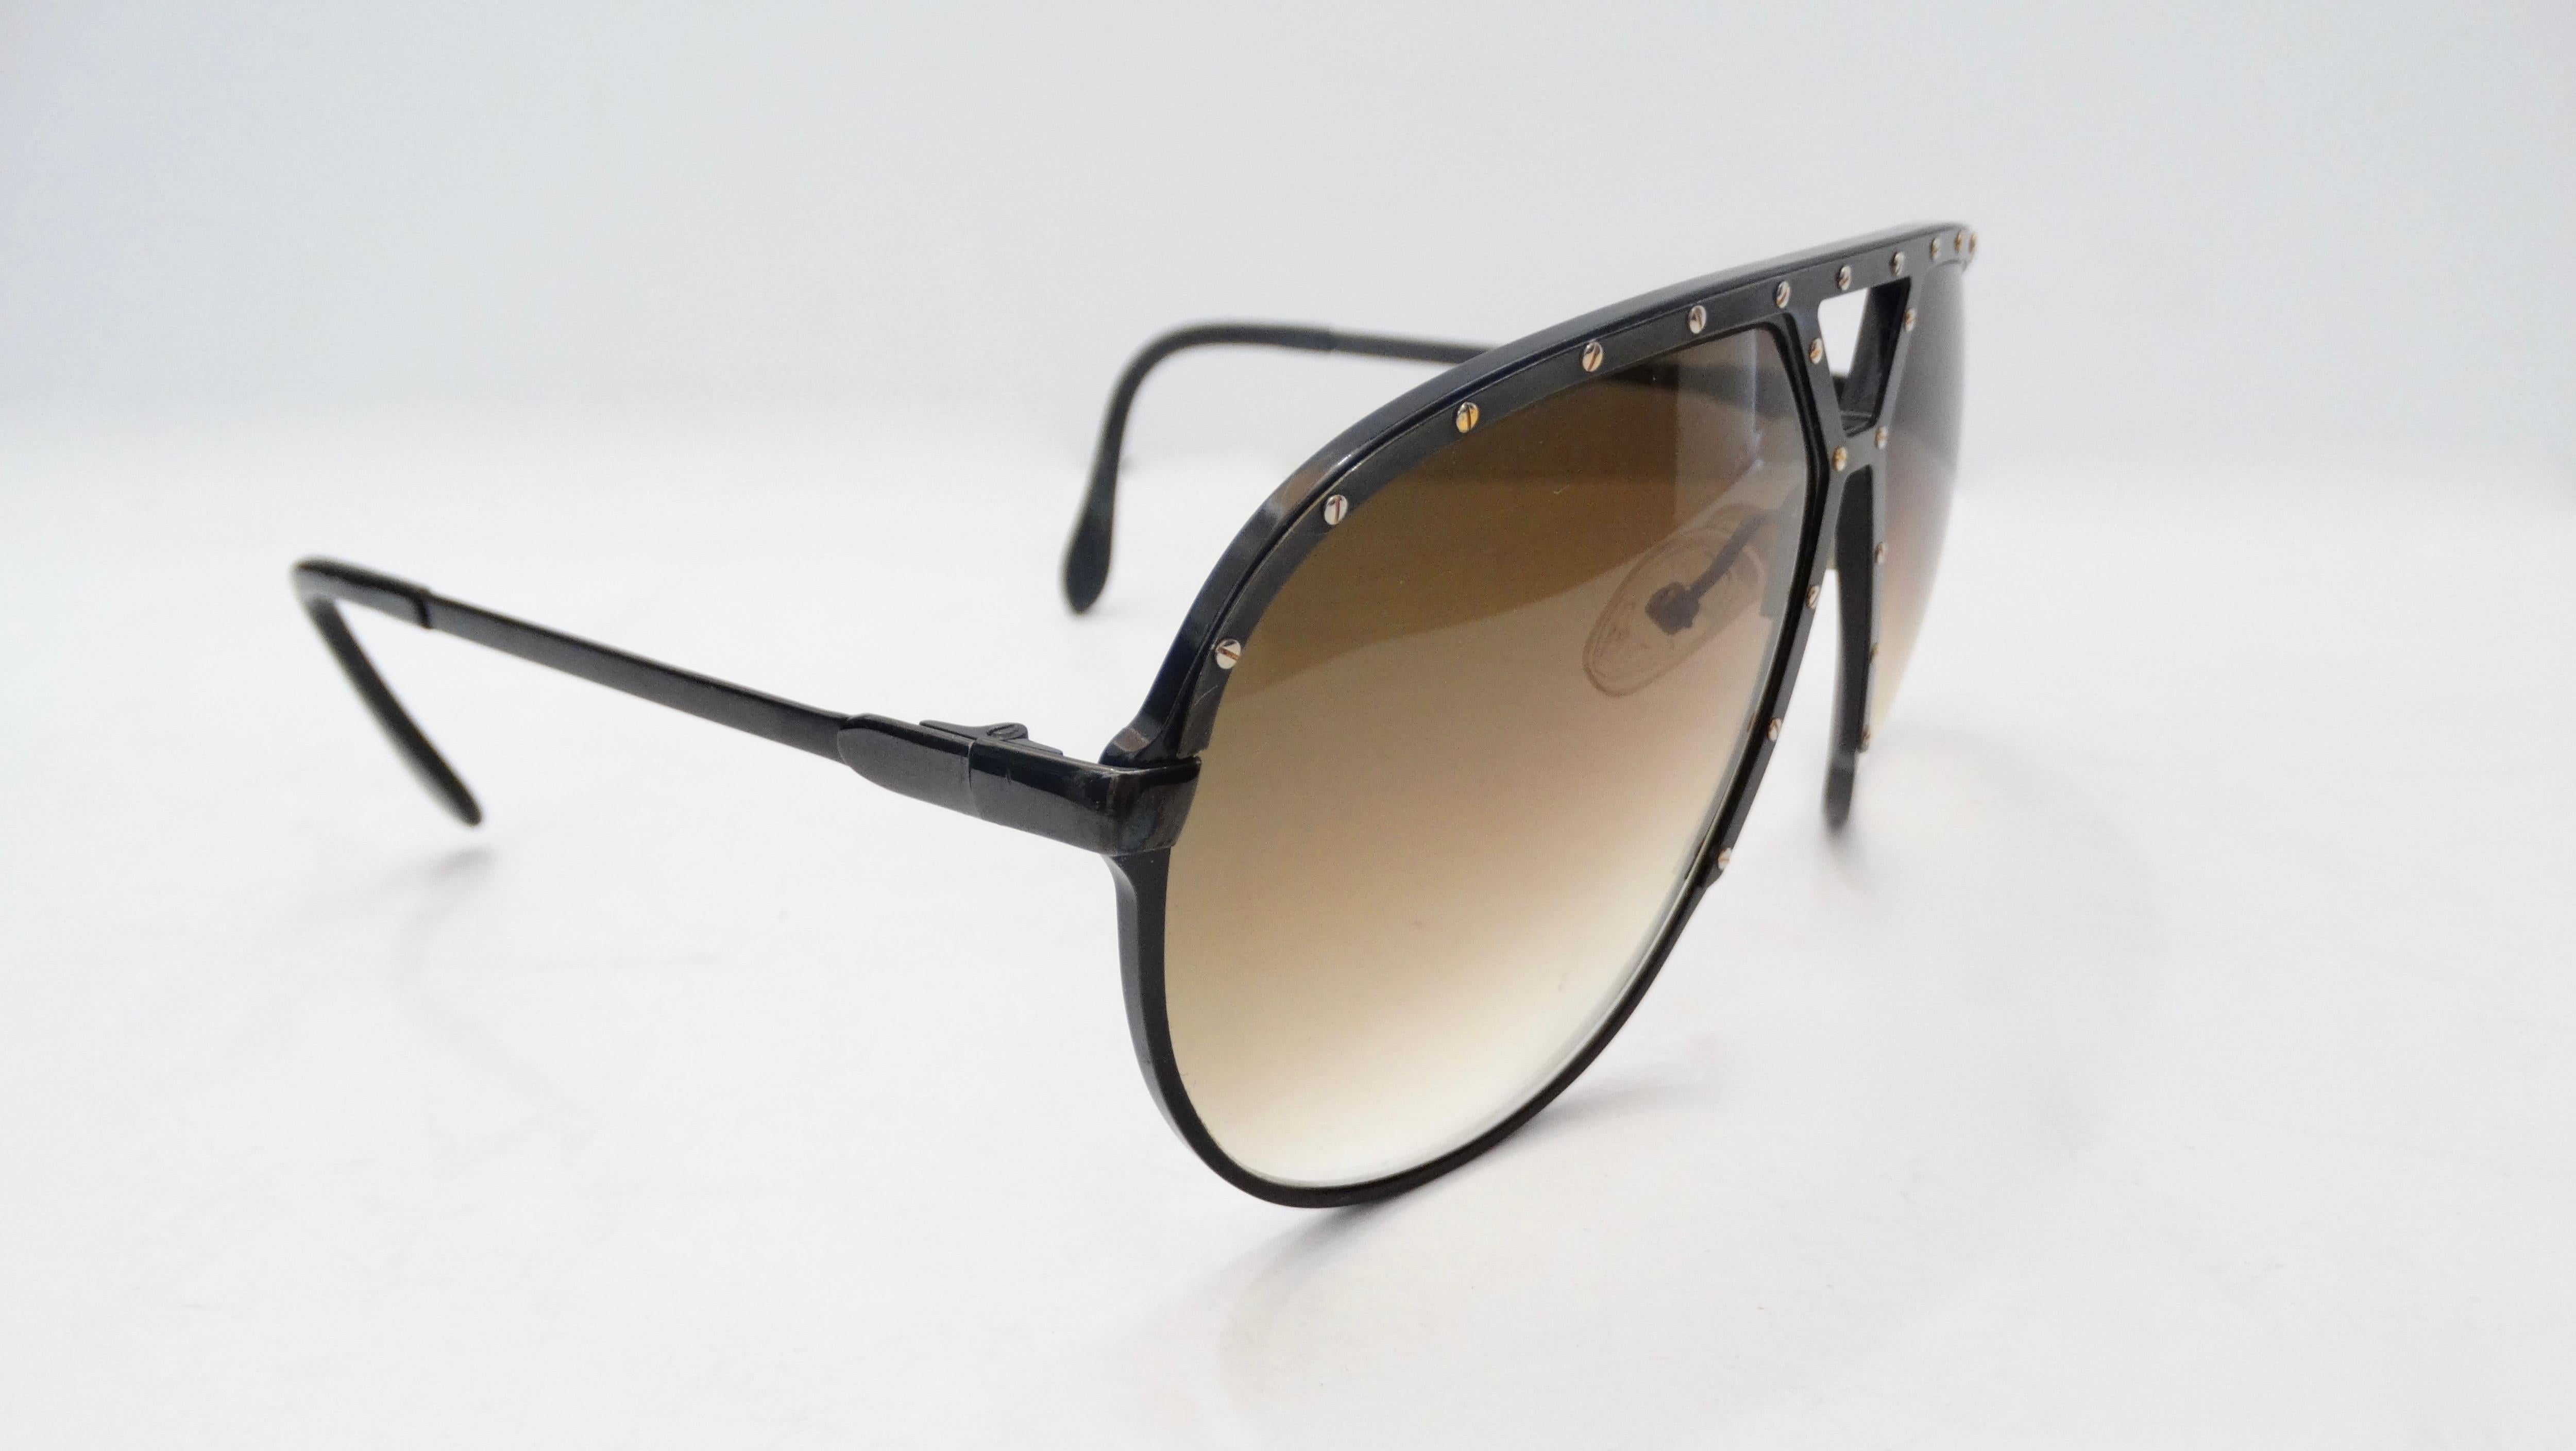 The Most Amazing Sunglasses! Circa late 1980s, these Alpina M1 sunglasses are an aviator style and feature a black metal frame with silver plated flat head screws on the top bar and down the bridge. Dark brown gradient lenses. The most killer